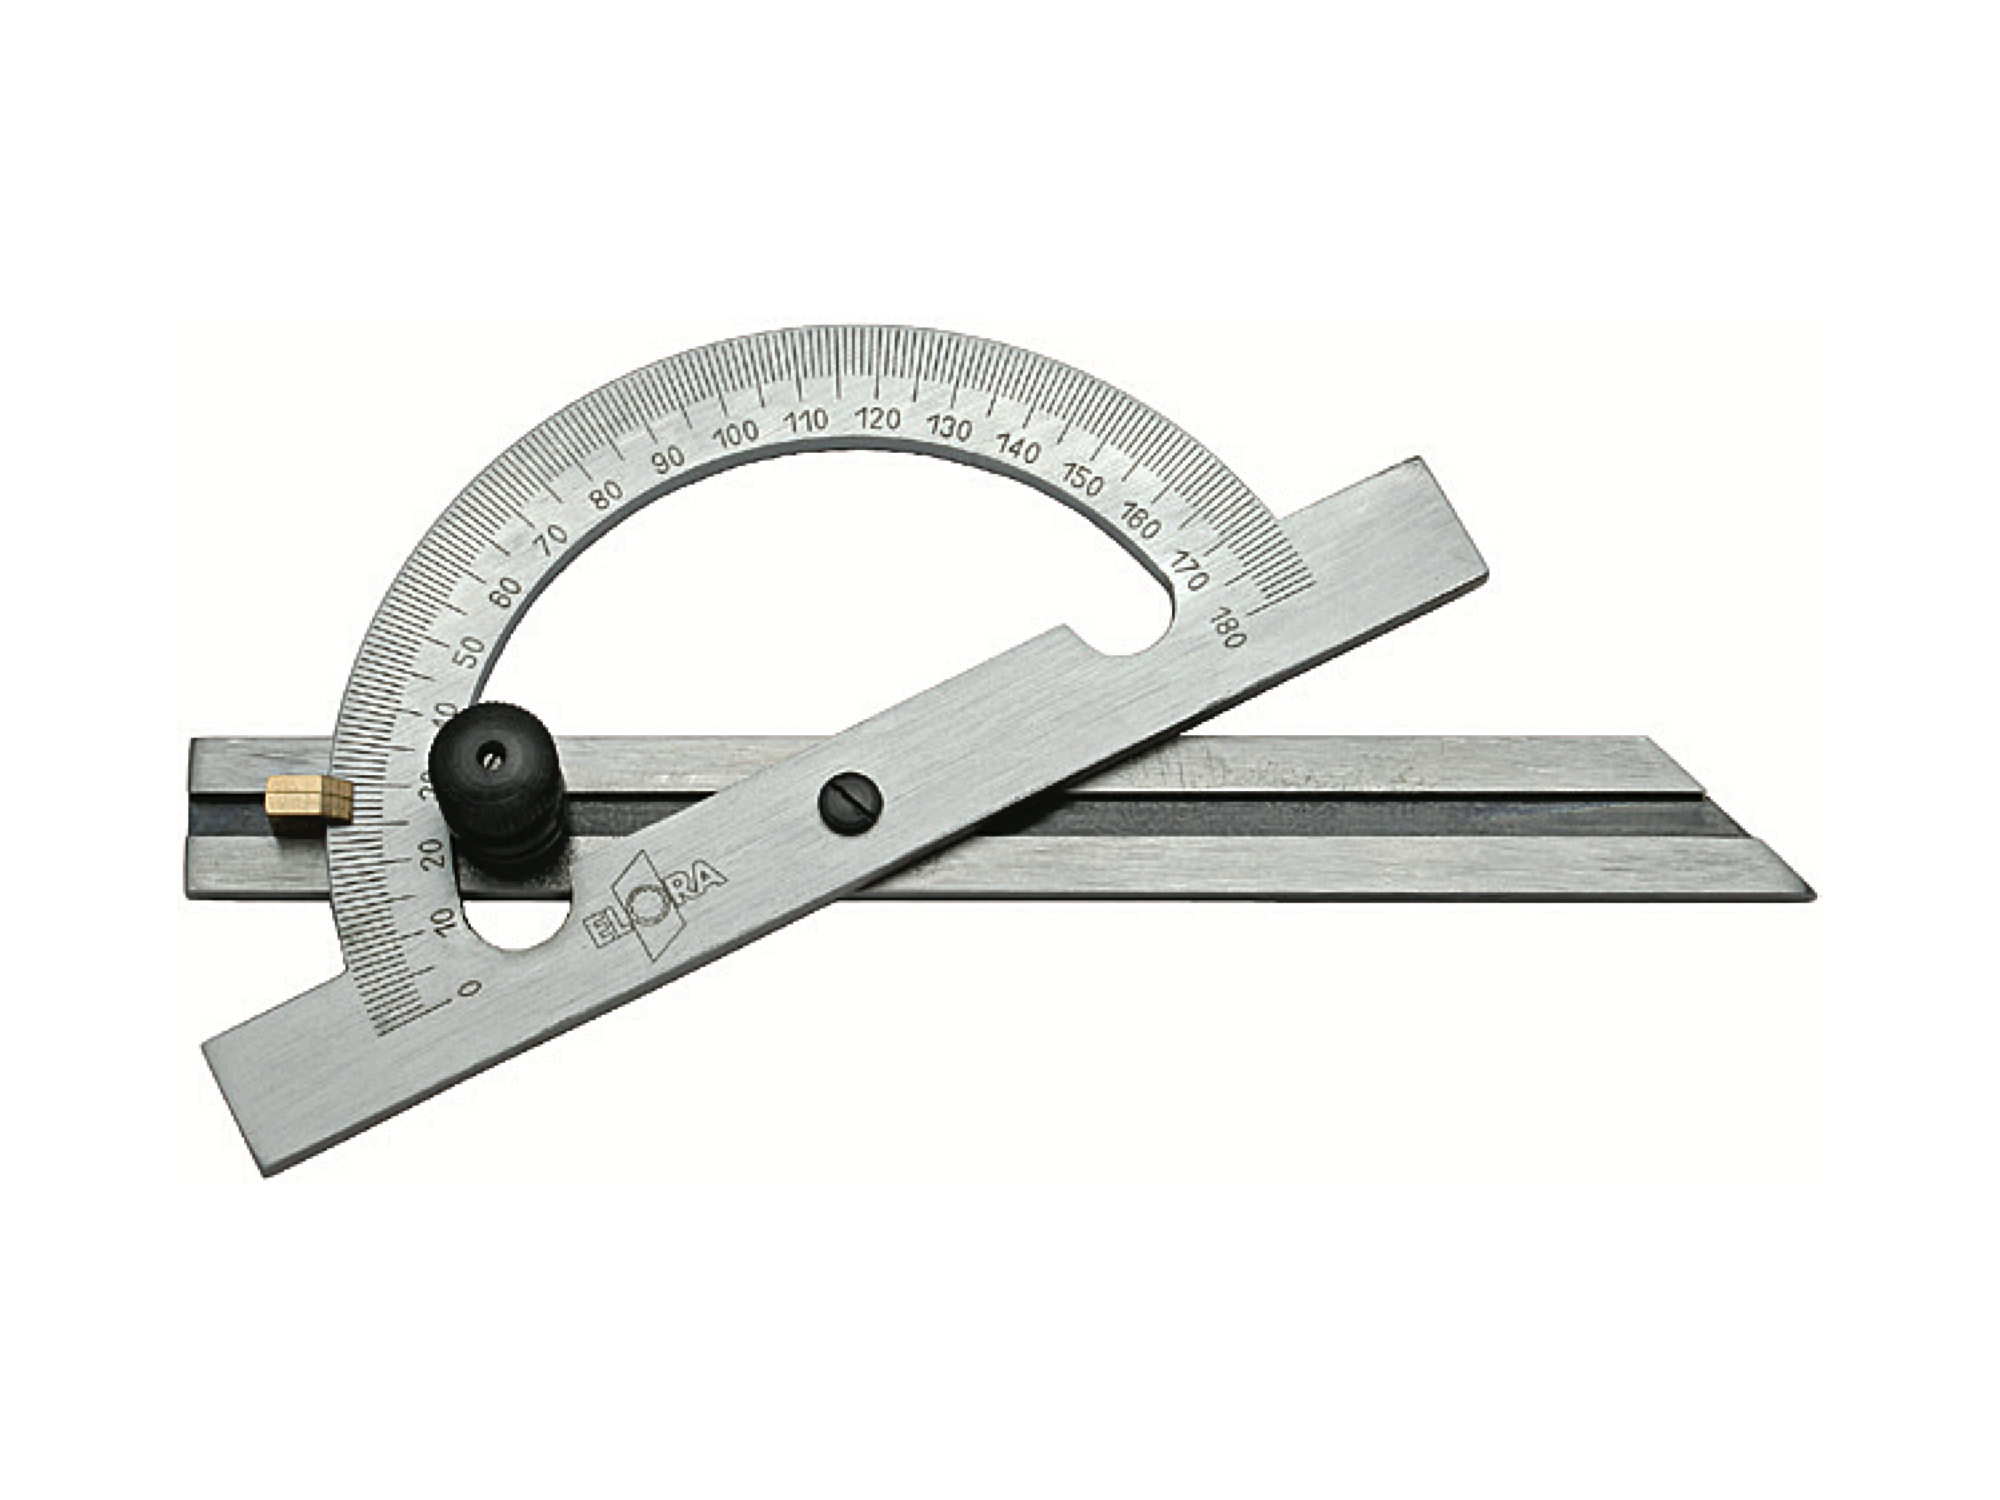 ELORA 1537 Protractor For Measurement (ELORA Tools) - Premium Protractor from ELORA - Shop now at Yew Aik.